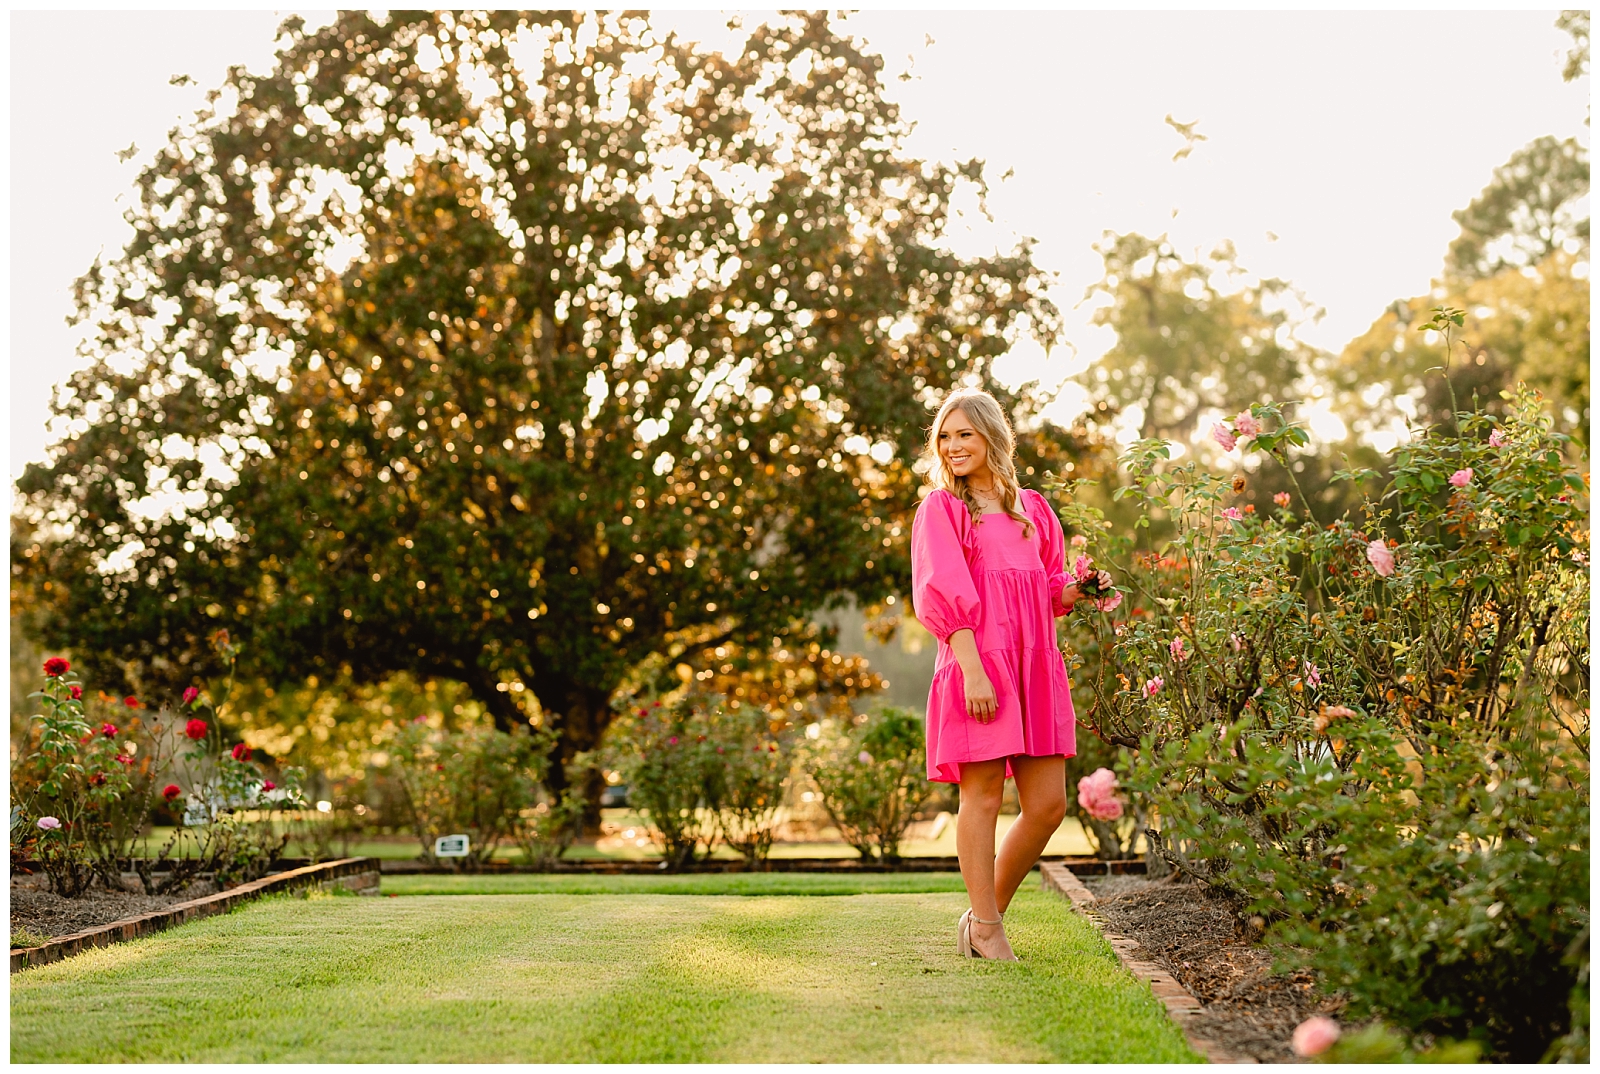 Senior Pictures in Thomasville, Georgia at the Rose Garden during sunset with hot pink dress.